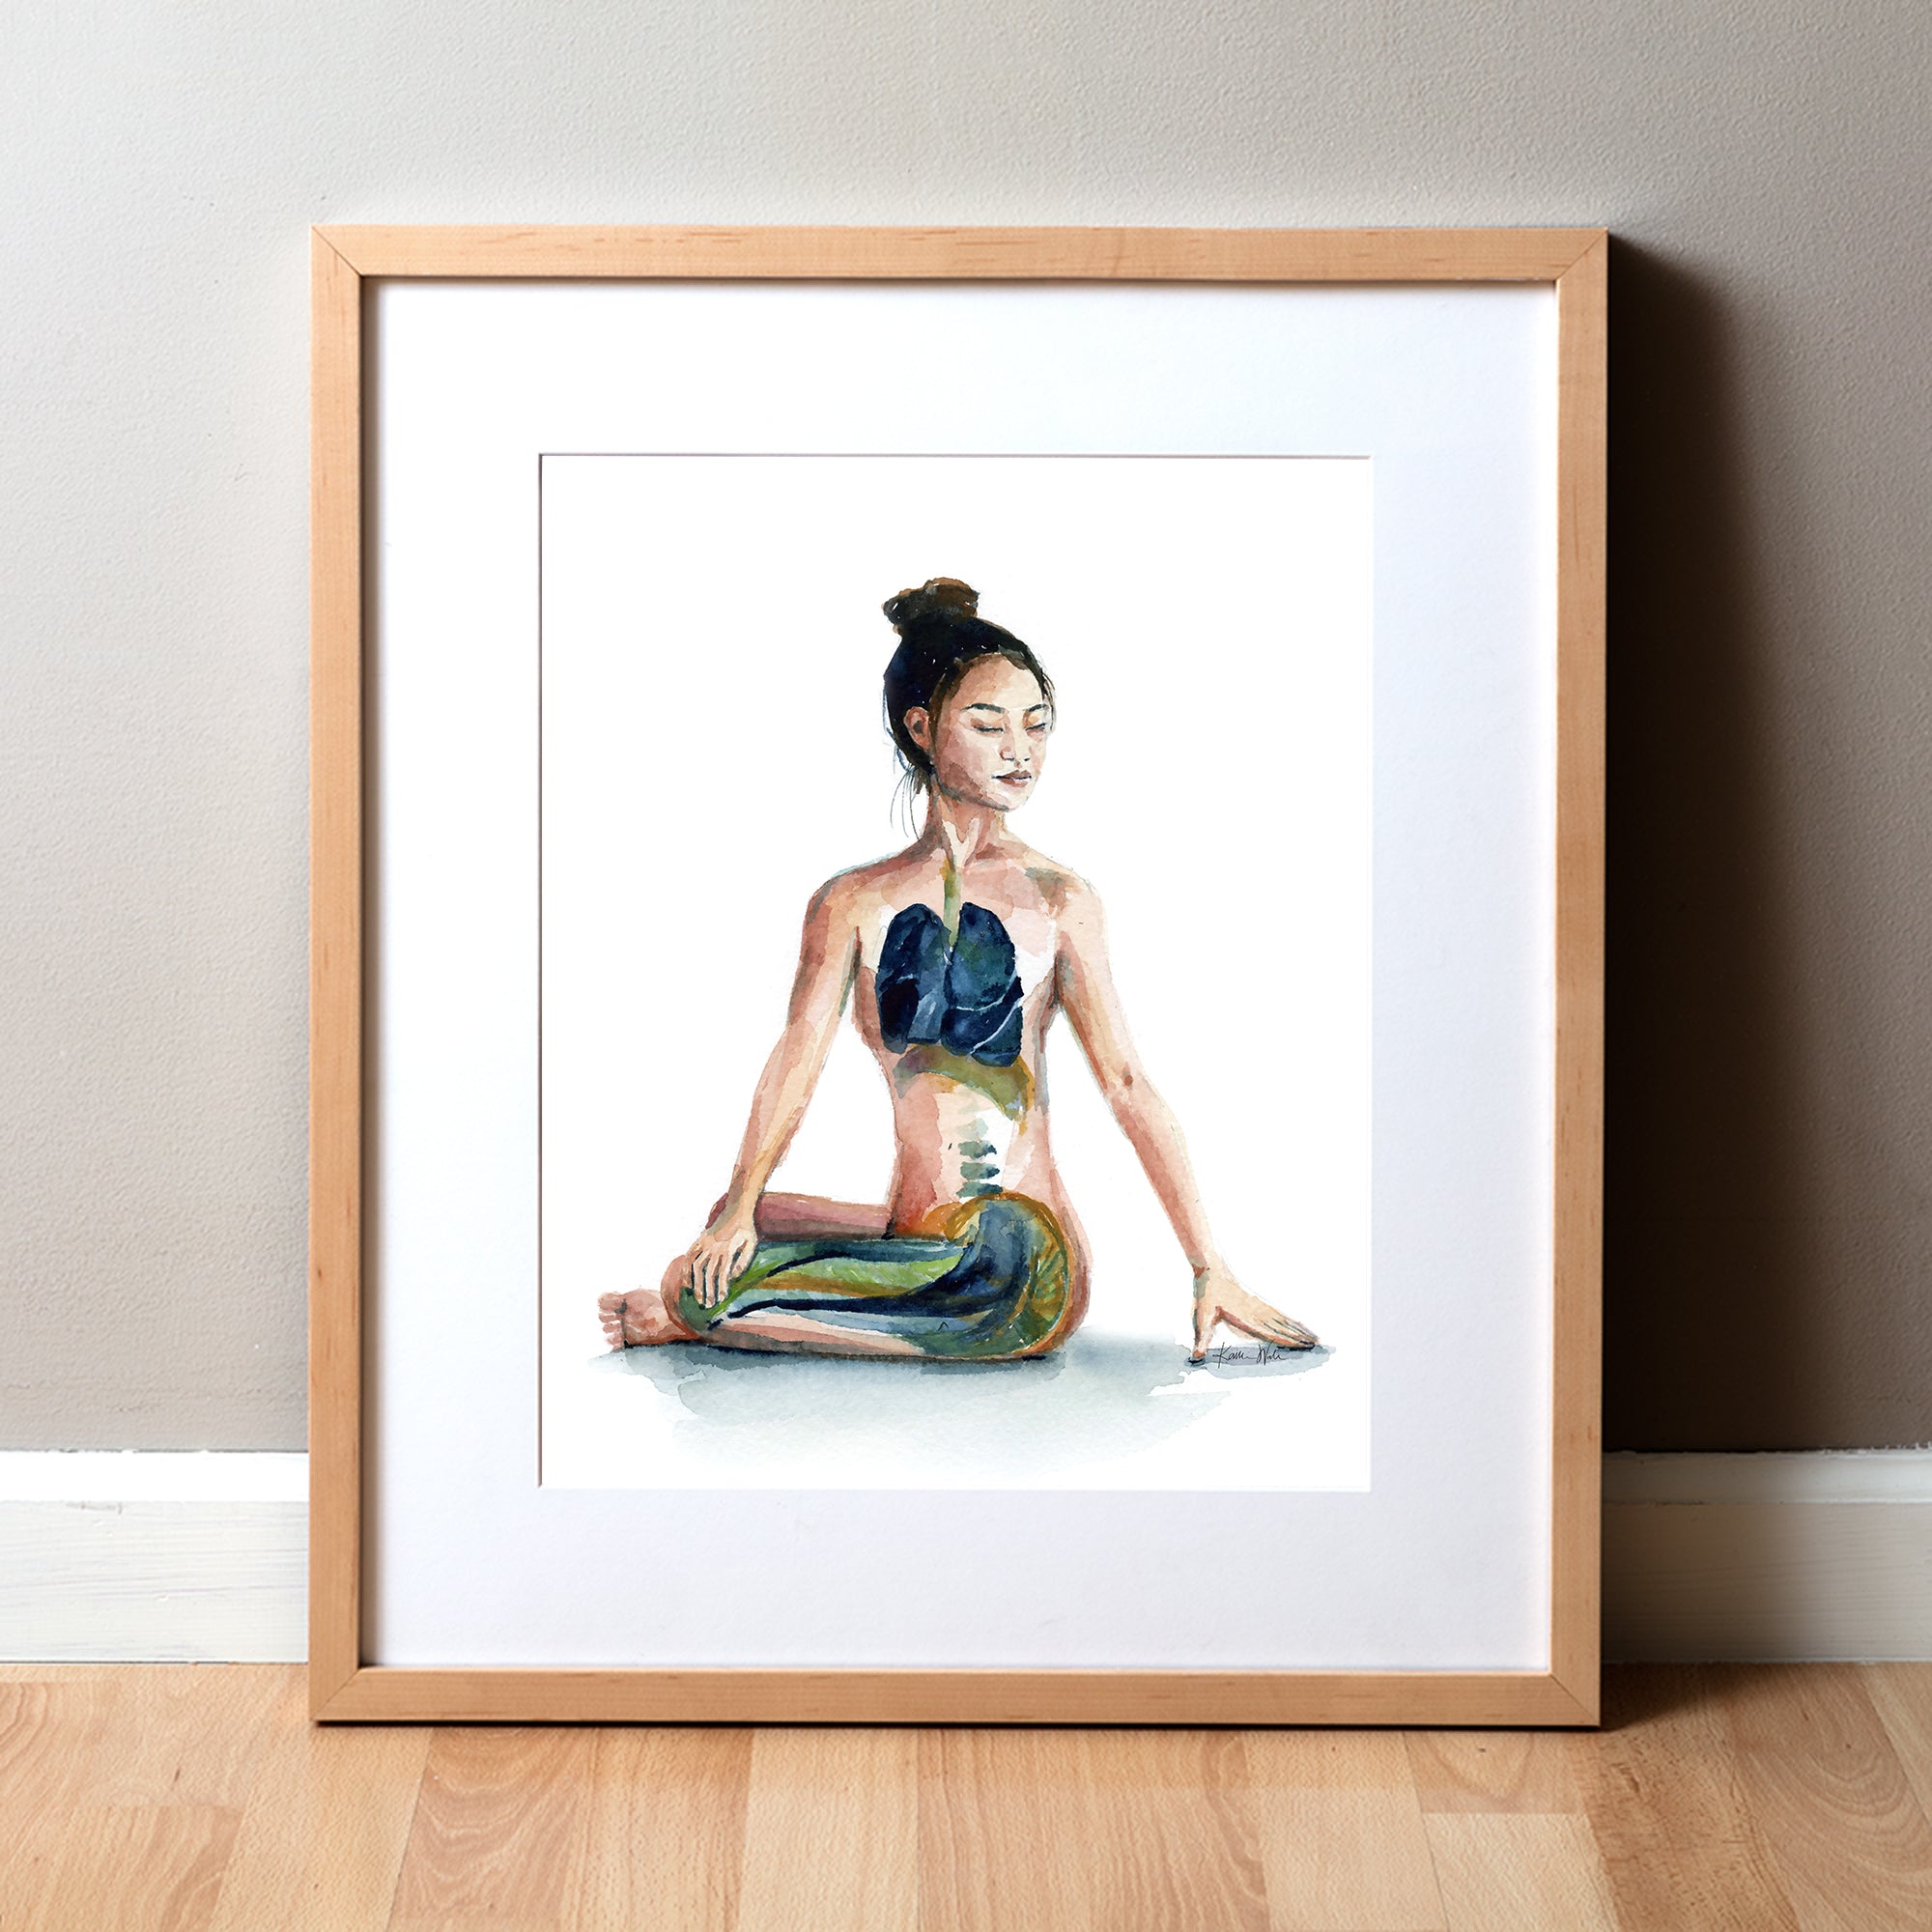 Framed watercolor painting of a woman with her eyes closed in a seated yoga pose.